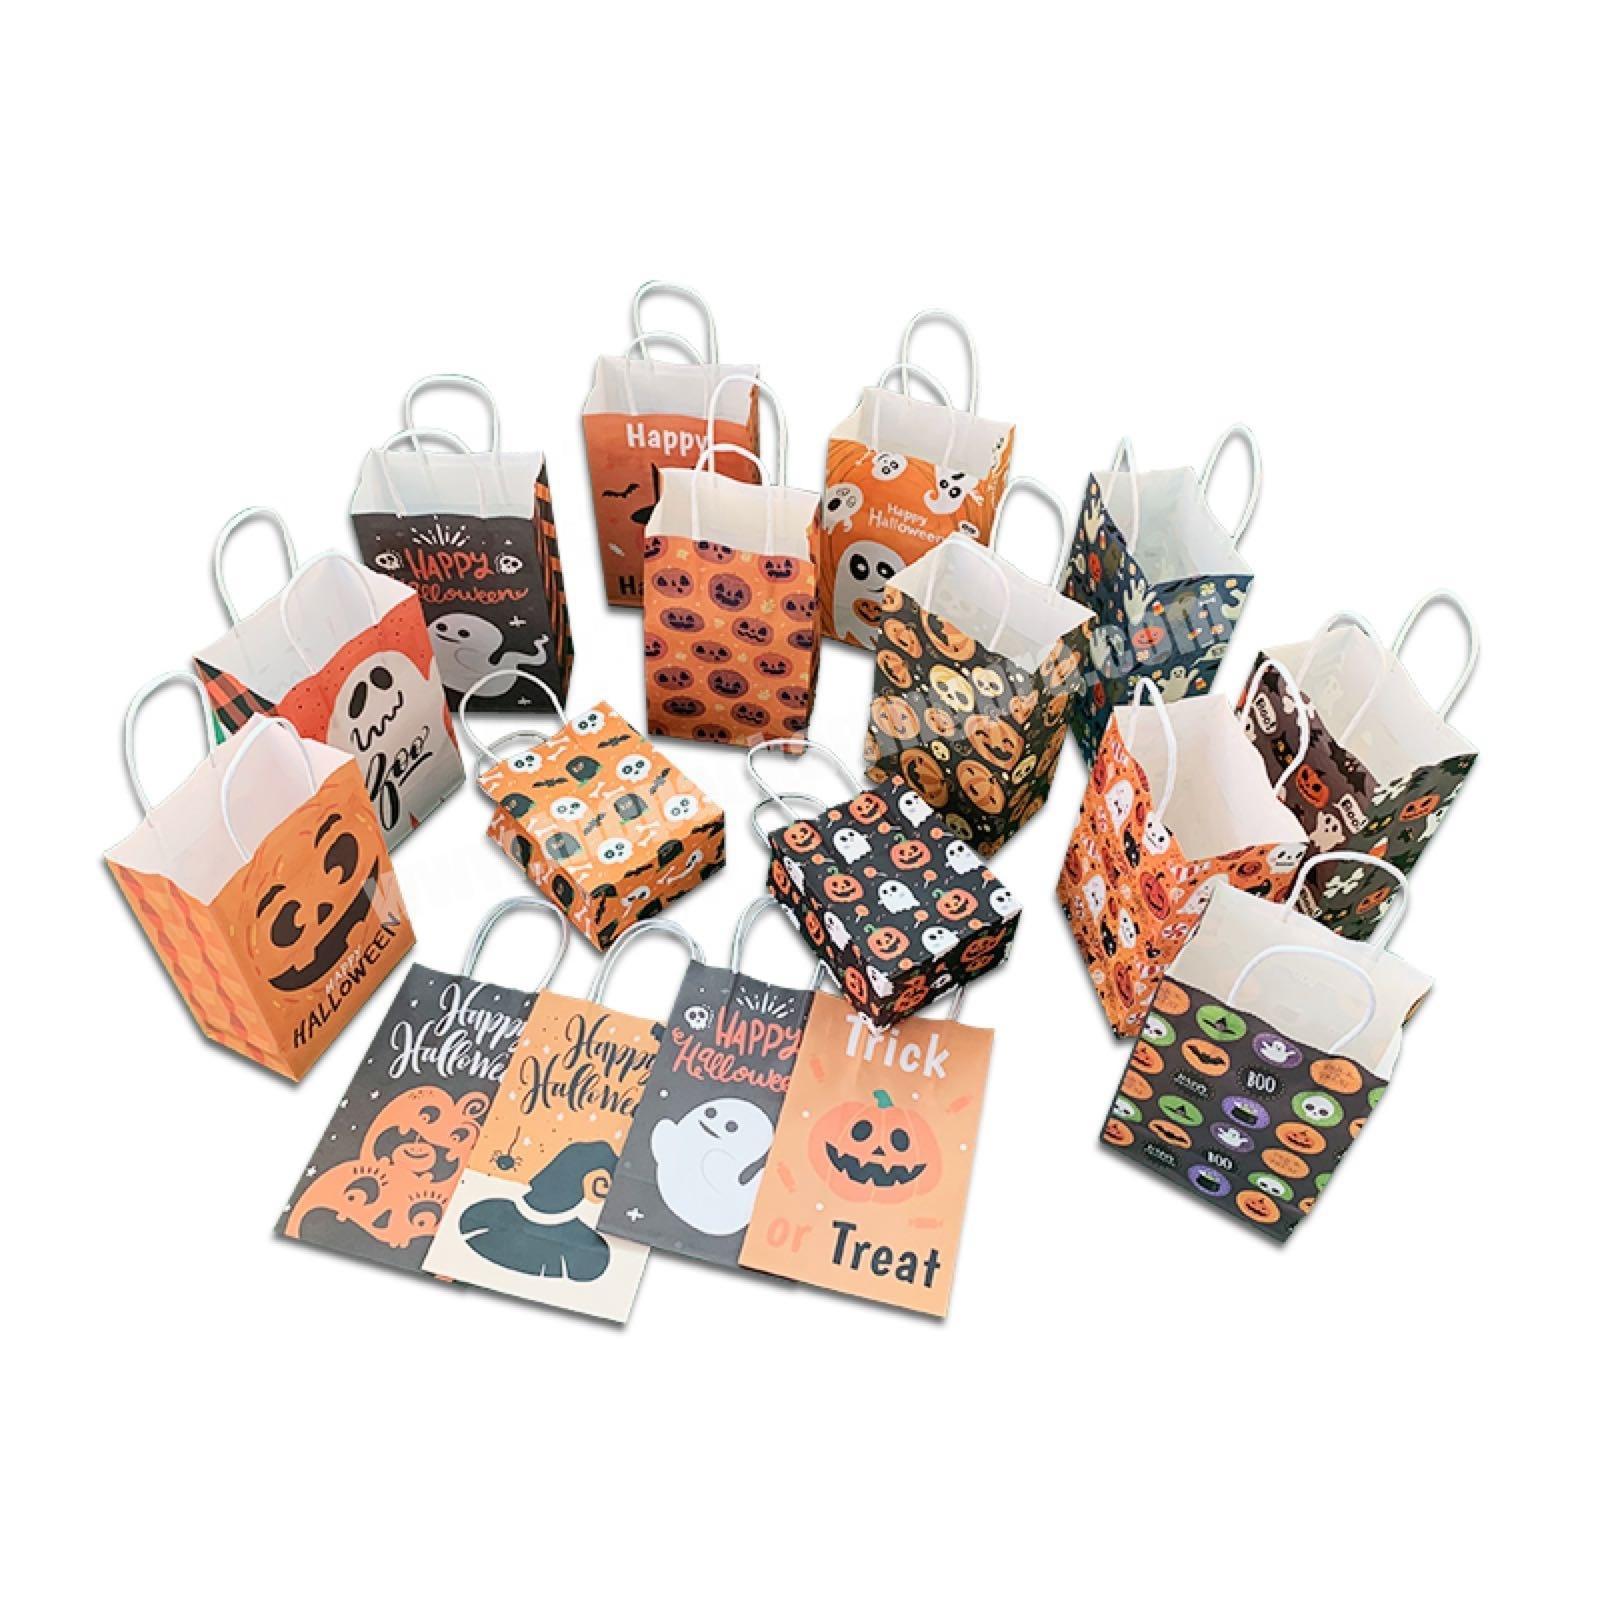 Printed Craft Fancy Halloween Luxury Shopping Paper Gift Bags With Handles